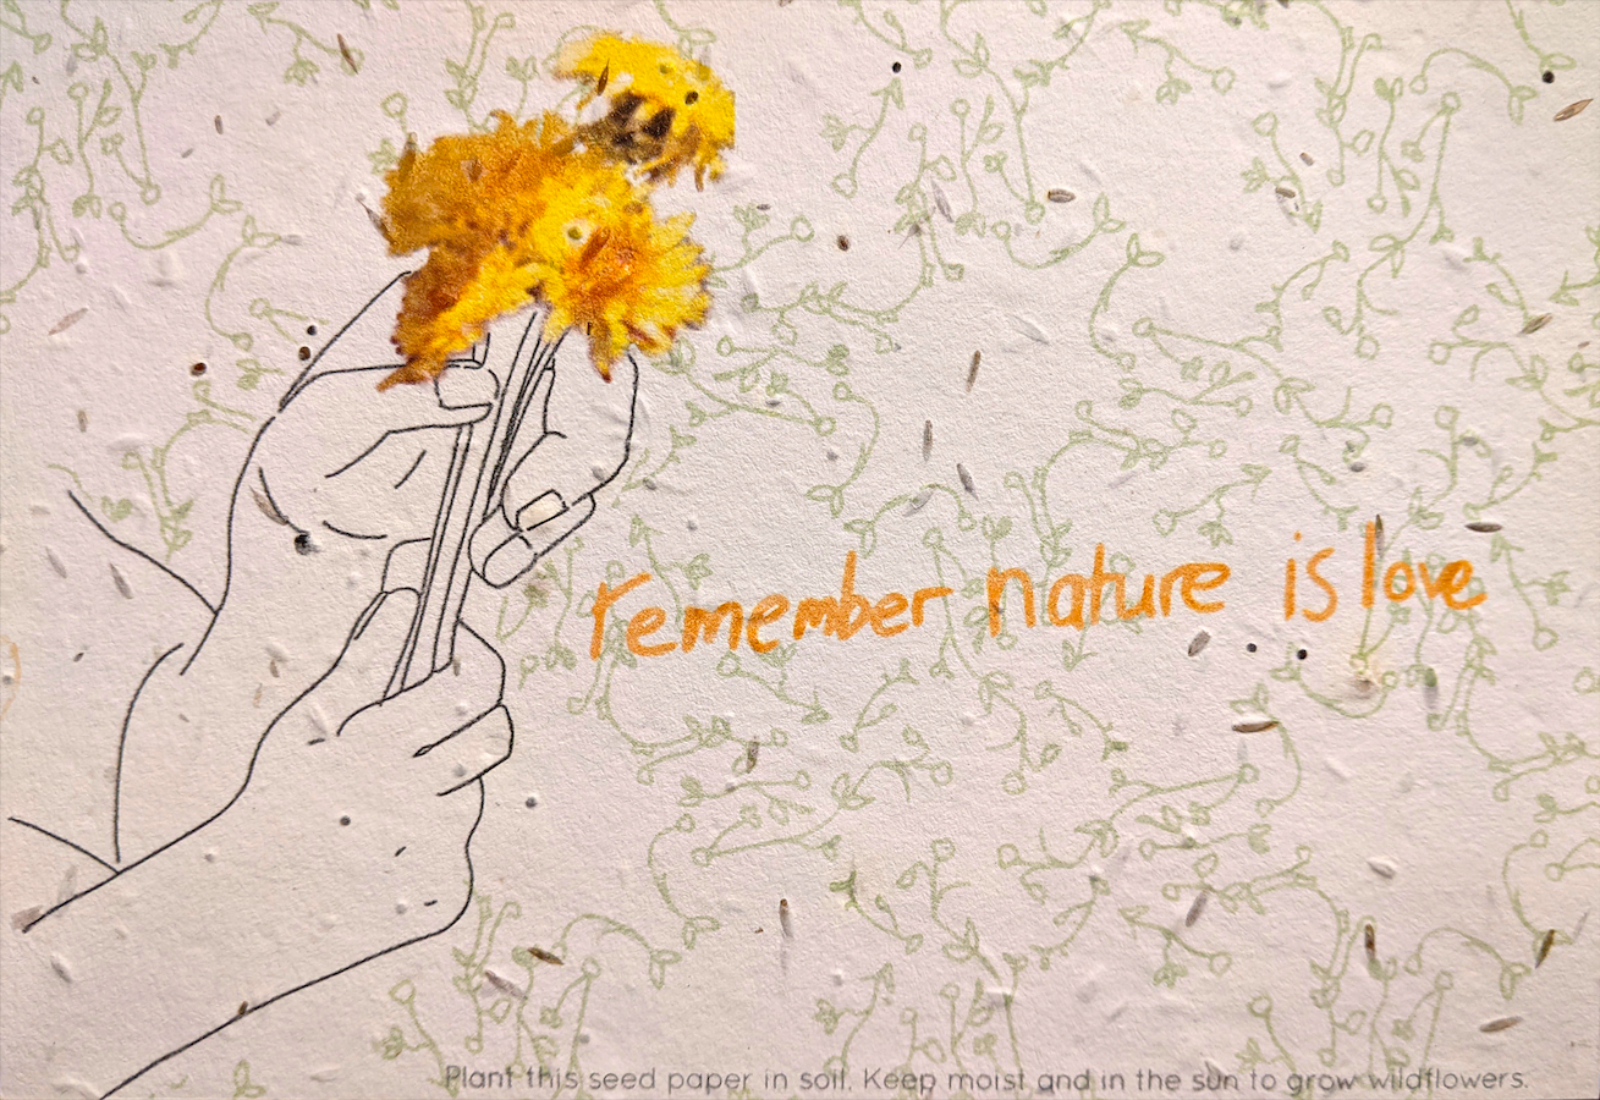 A black line drawing of hands holding yellow flowers. 'remember nature is love' in yellow text on a green patterned background.